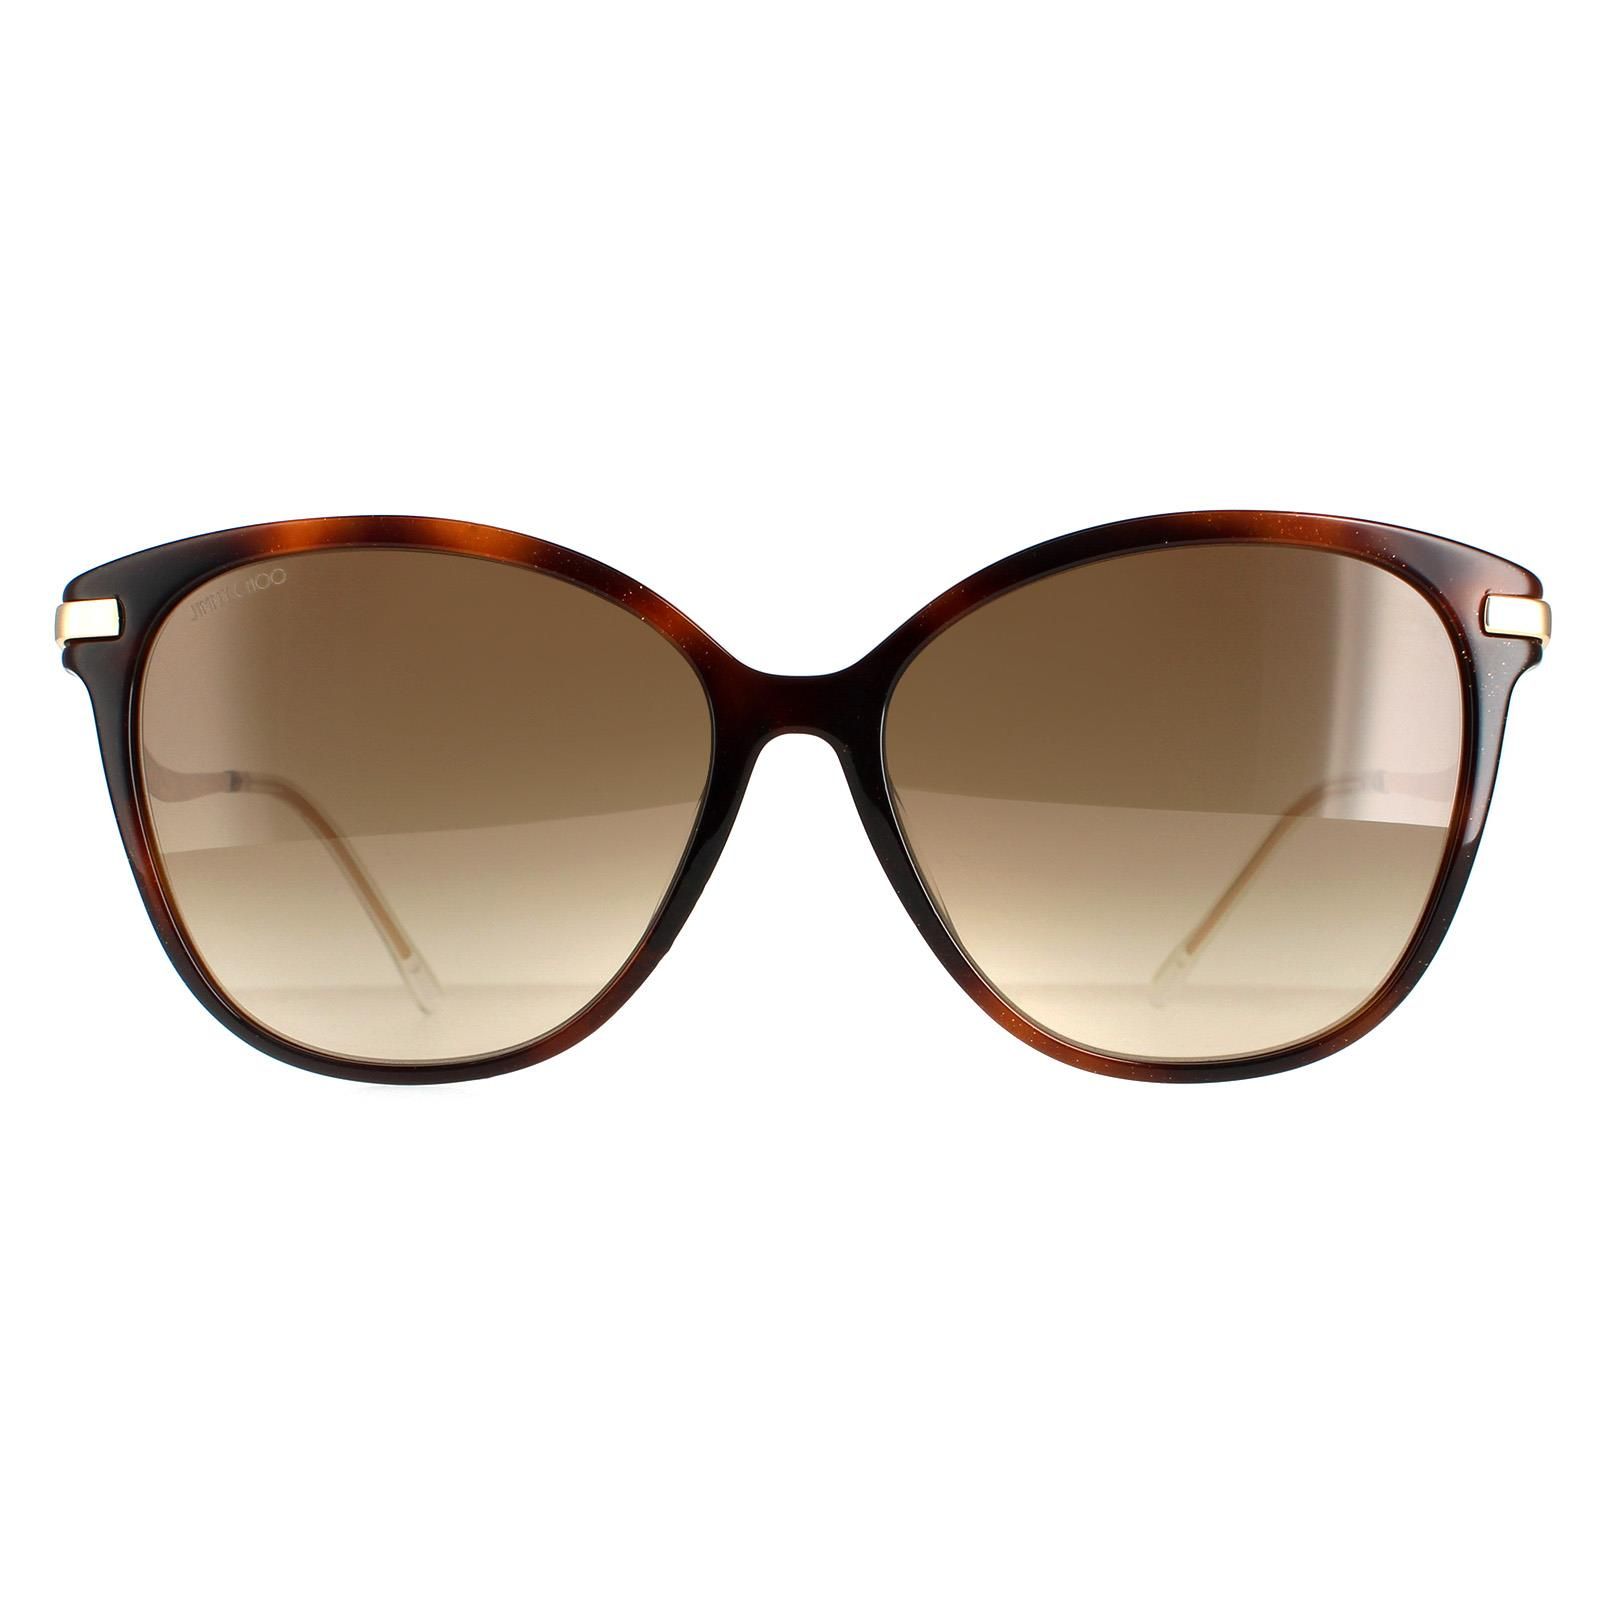 Jimmy Choo CatEye Womens Glitter Havana Brown Gradient Peg/F/S  Jimmy Choo are a cat eye style crafted from lightweight acetate. The Jimmy Choo logo is engraved into the wavy designed temples for brand authenticity